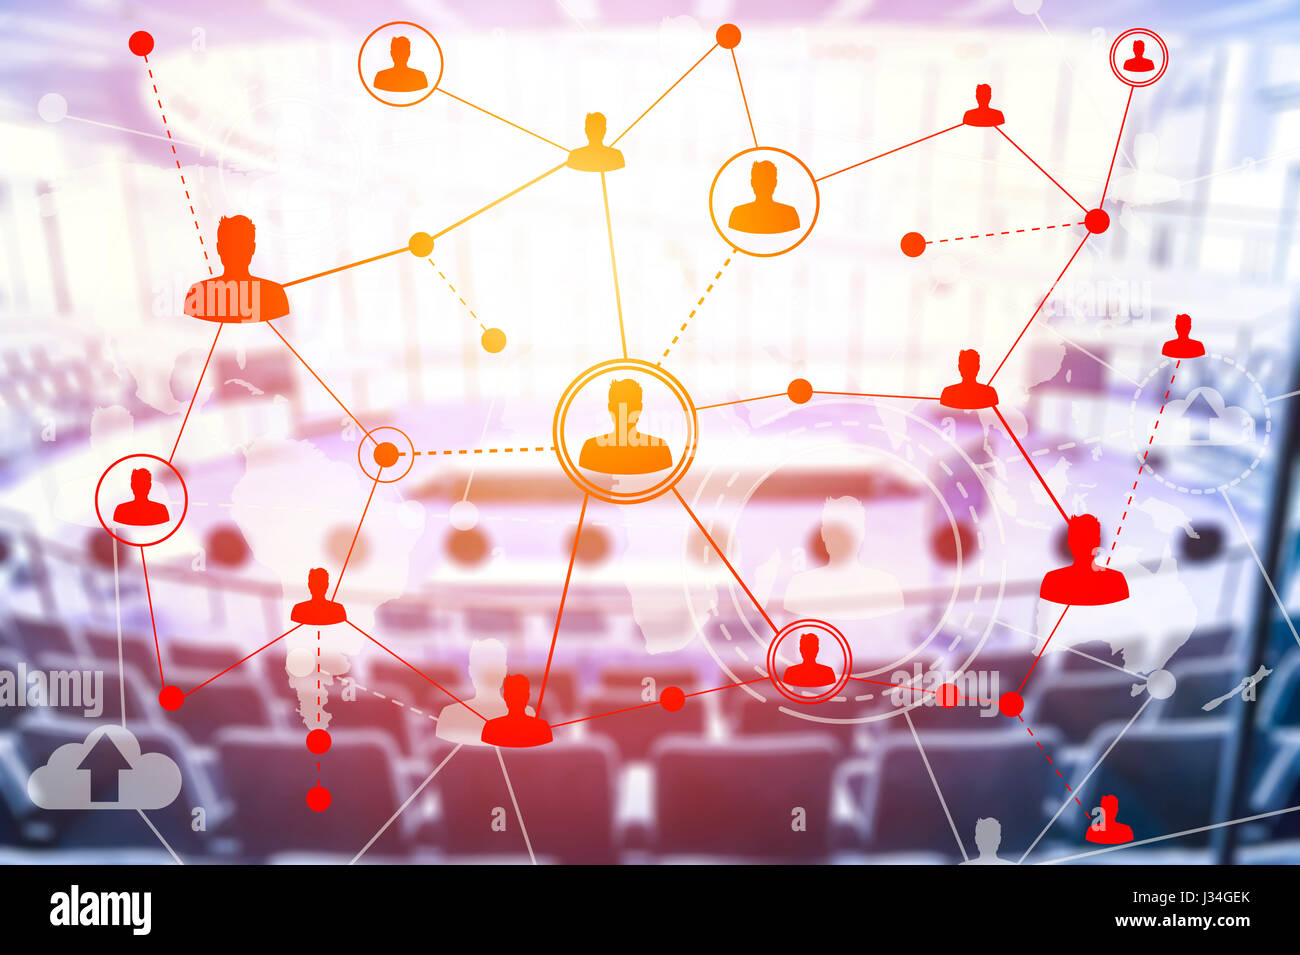 Social networking technologies in a conference hall. Social media concept Stock Photo